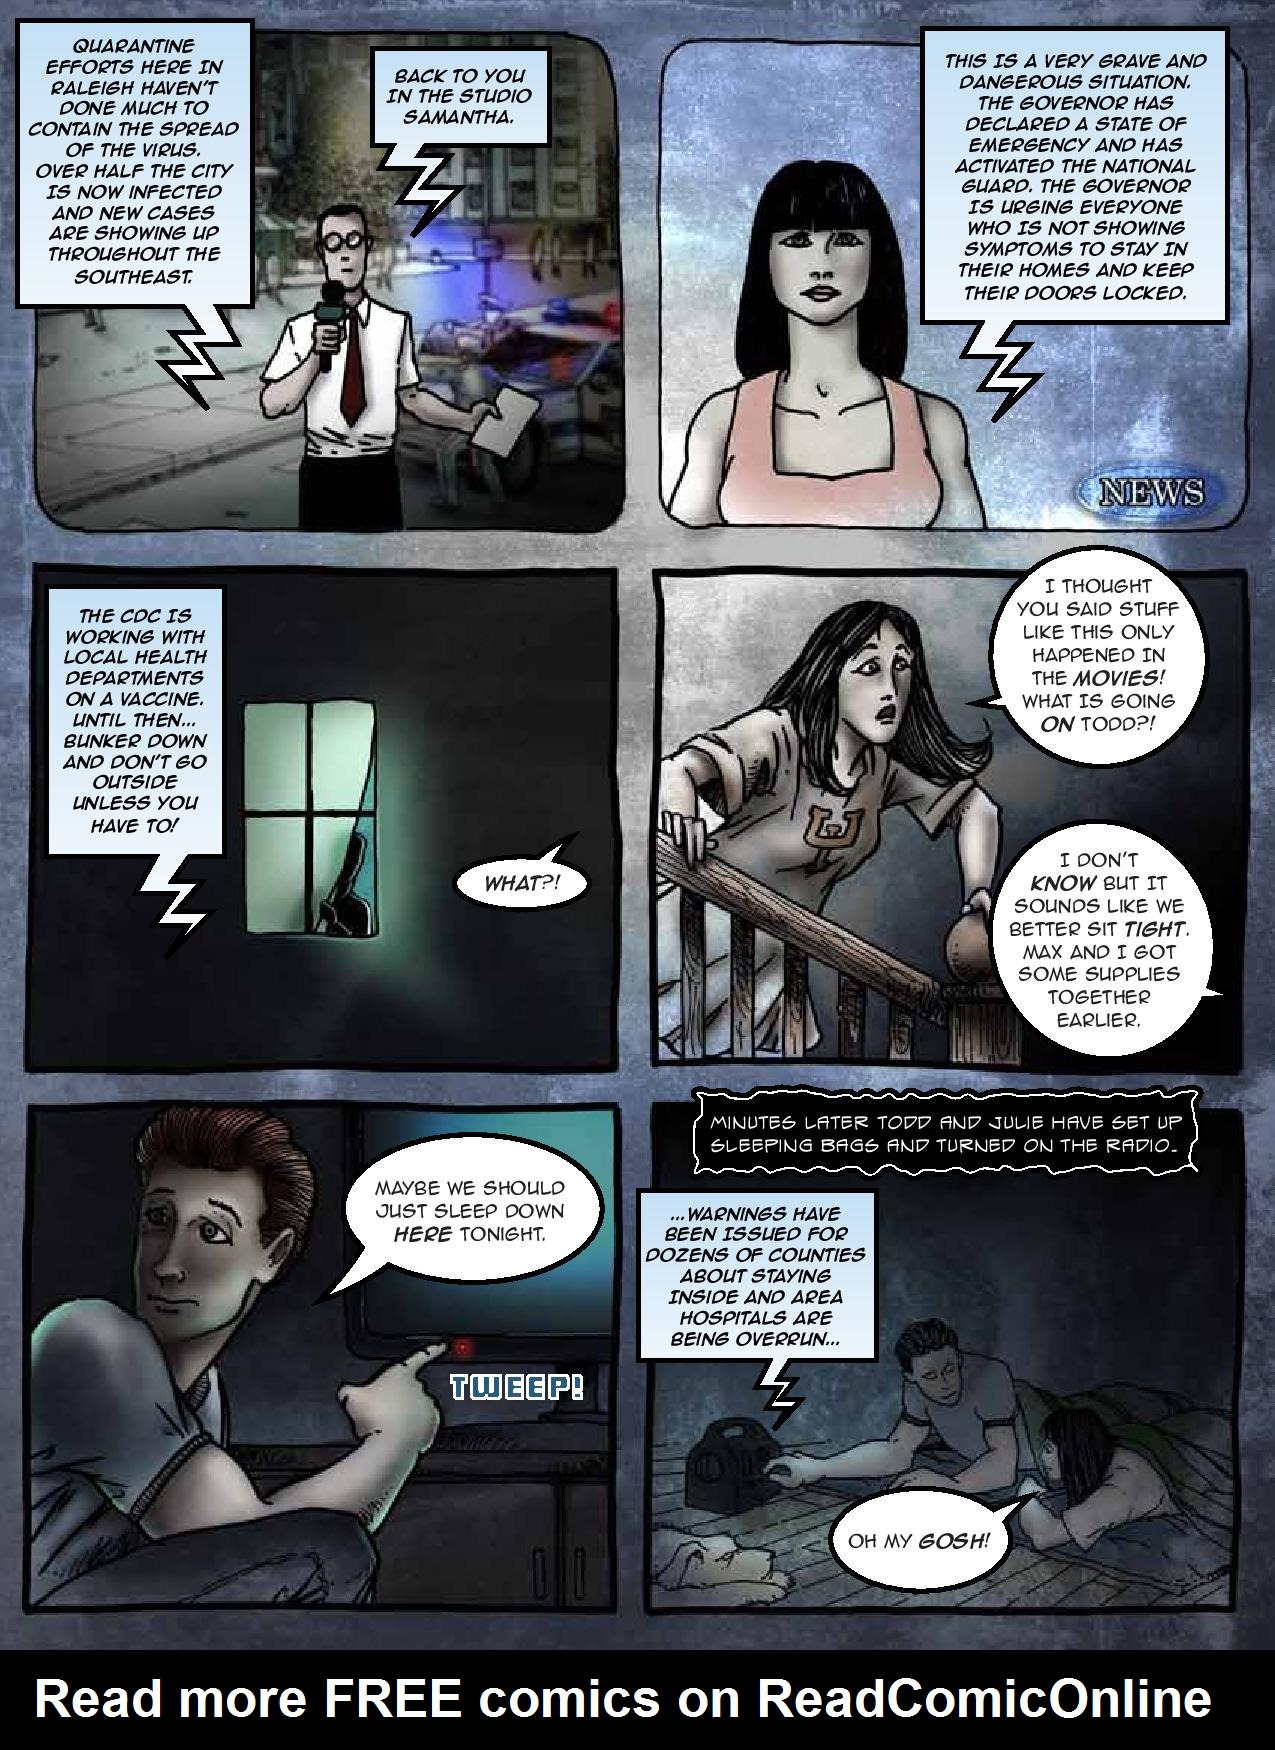 Read online Preparedness 101: A Zombie Pandemic comic -  Issue # Full - 12